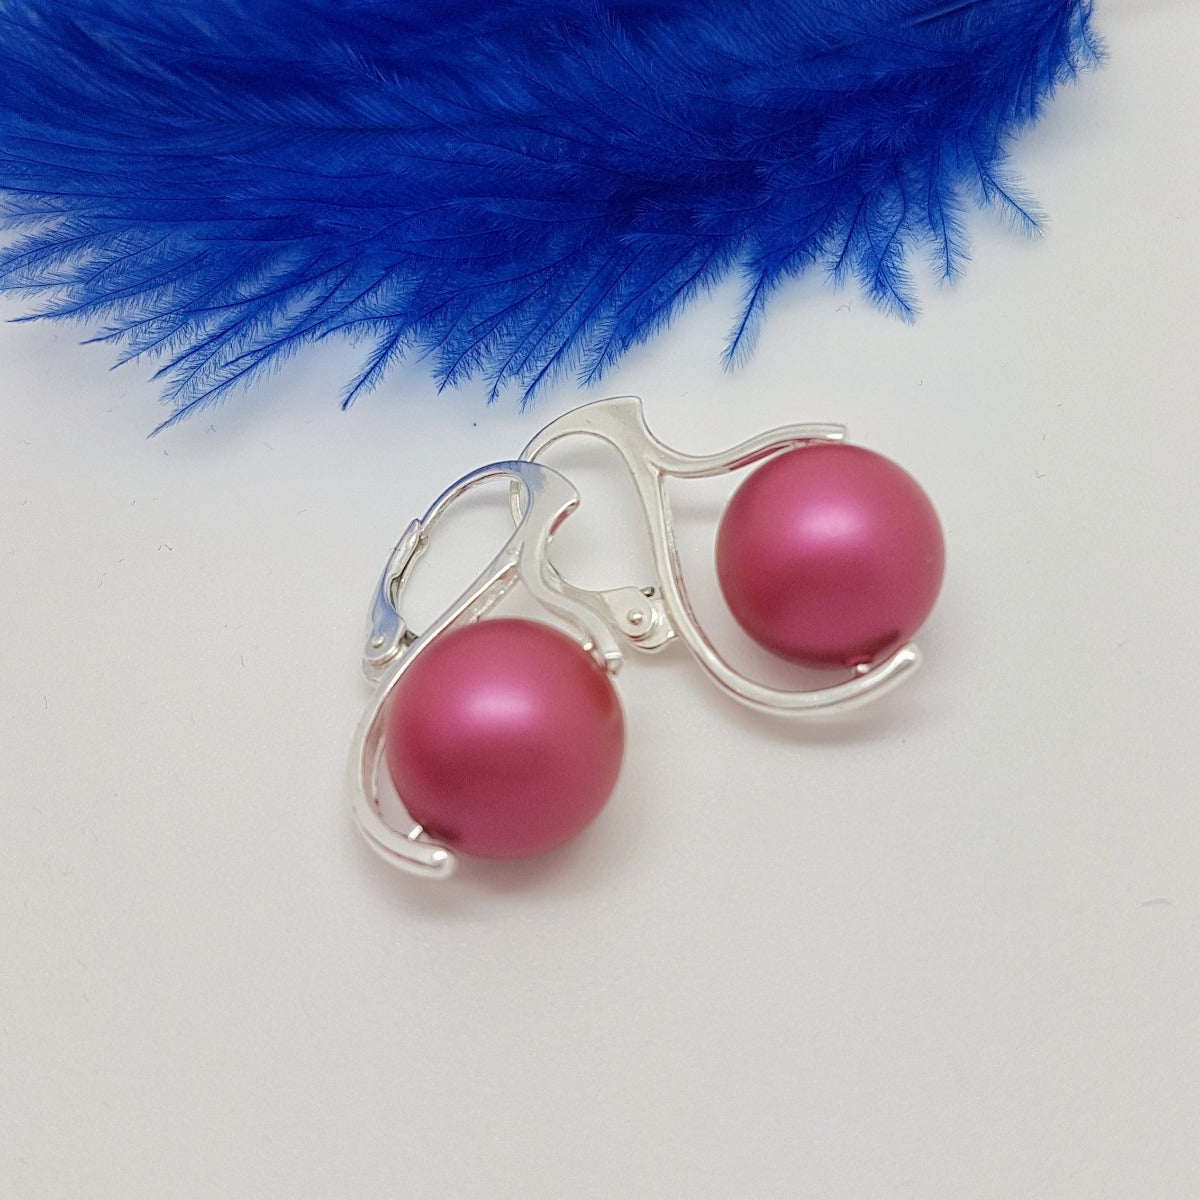 Crystal Pearl Luster Earrings in Mulberry Pink color, drop style, leverback fitting, by Magpie Gems Ireland